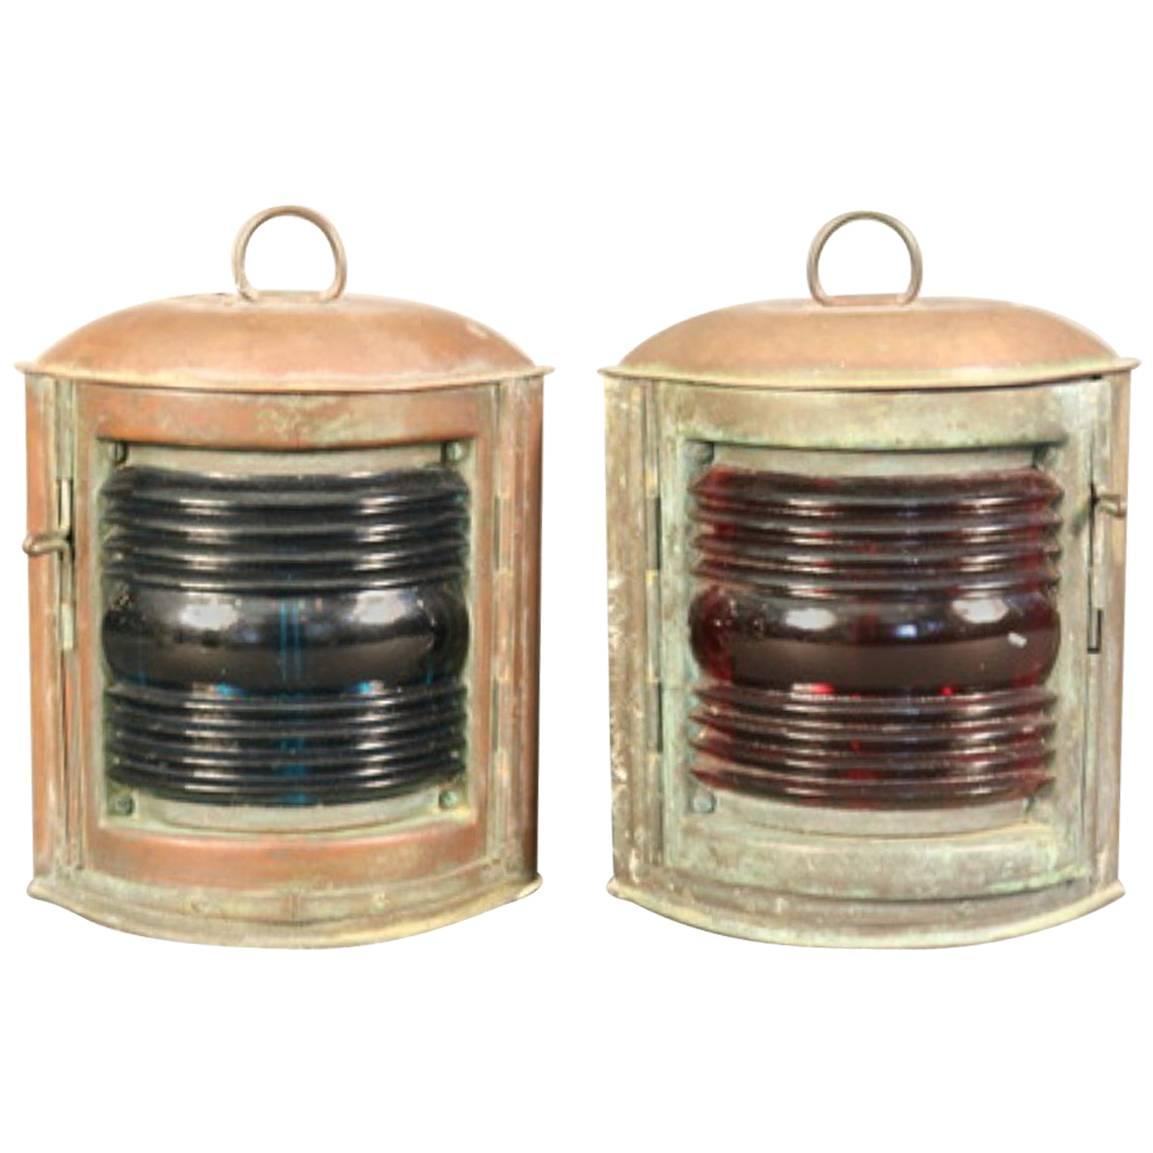 Pair of Port and Starboard Lanterns